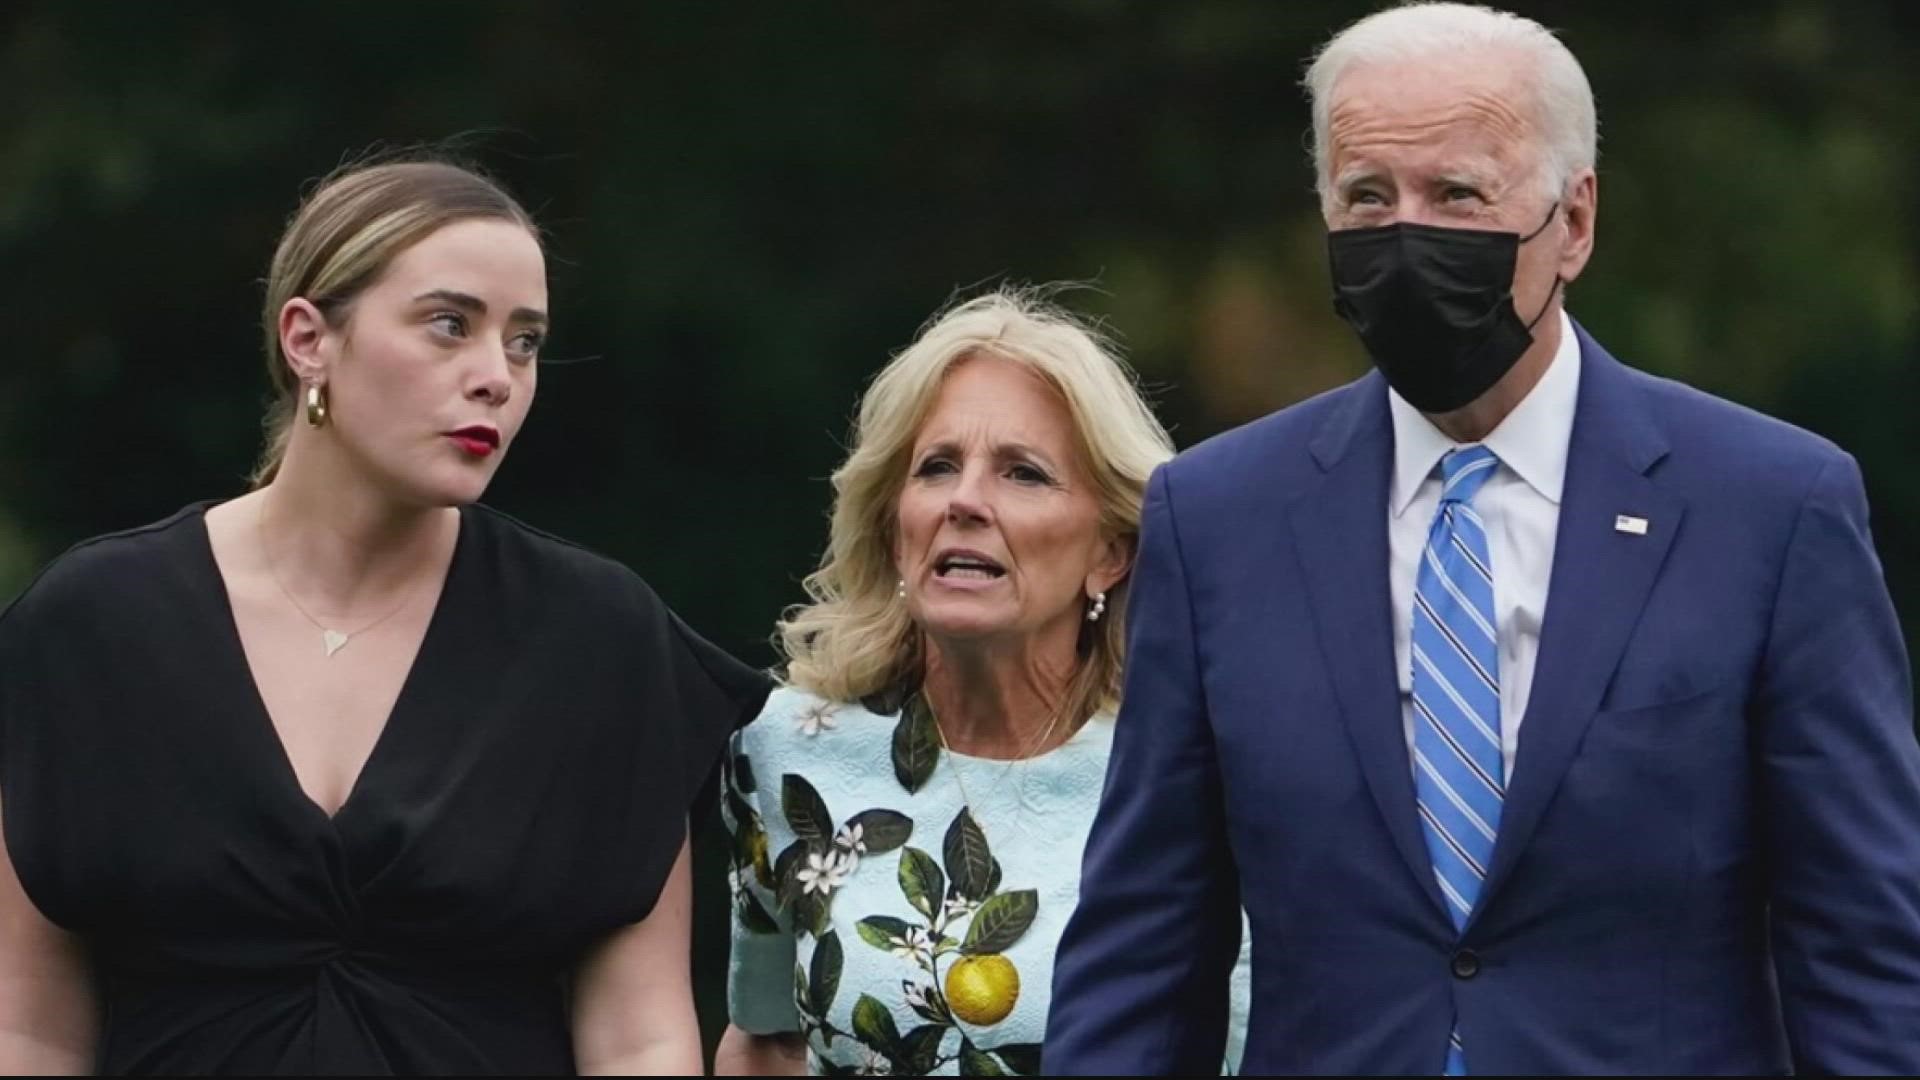 Naomi Biden, the granddaughter of President Joe Biden, and Peter Neal are getting married on the South Lawn in what will be the 19th wedding in the White House.